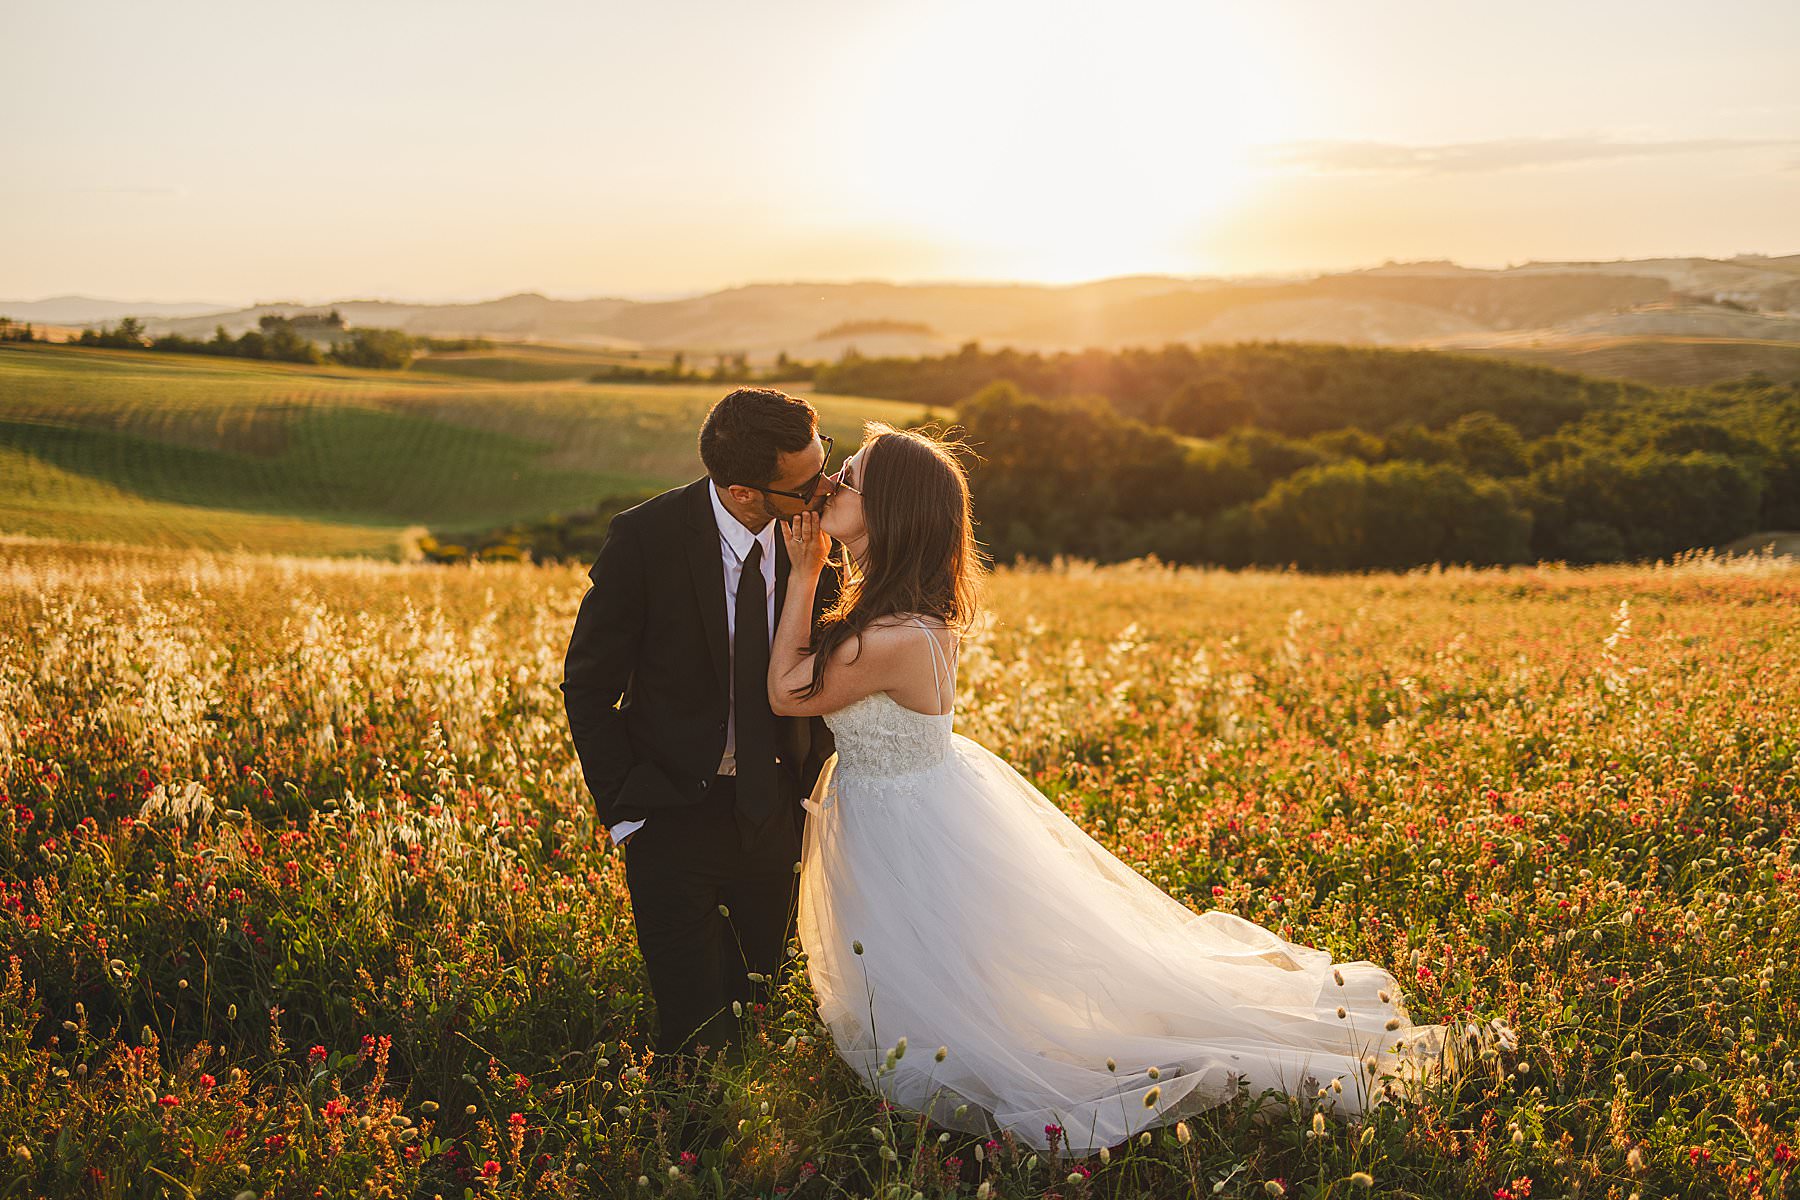 Exciting bride and groom elopement wedding portrait in the golden hour light in the heart of Tuscany countryside near Pienza